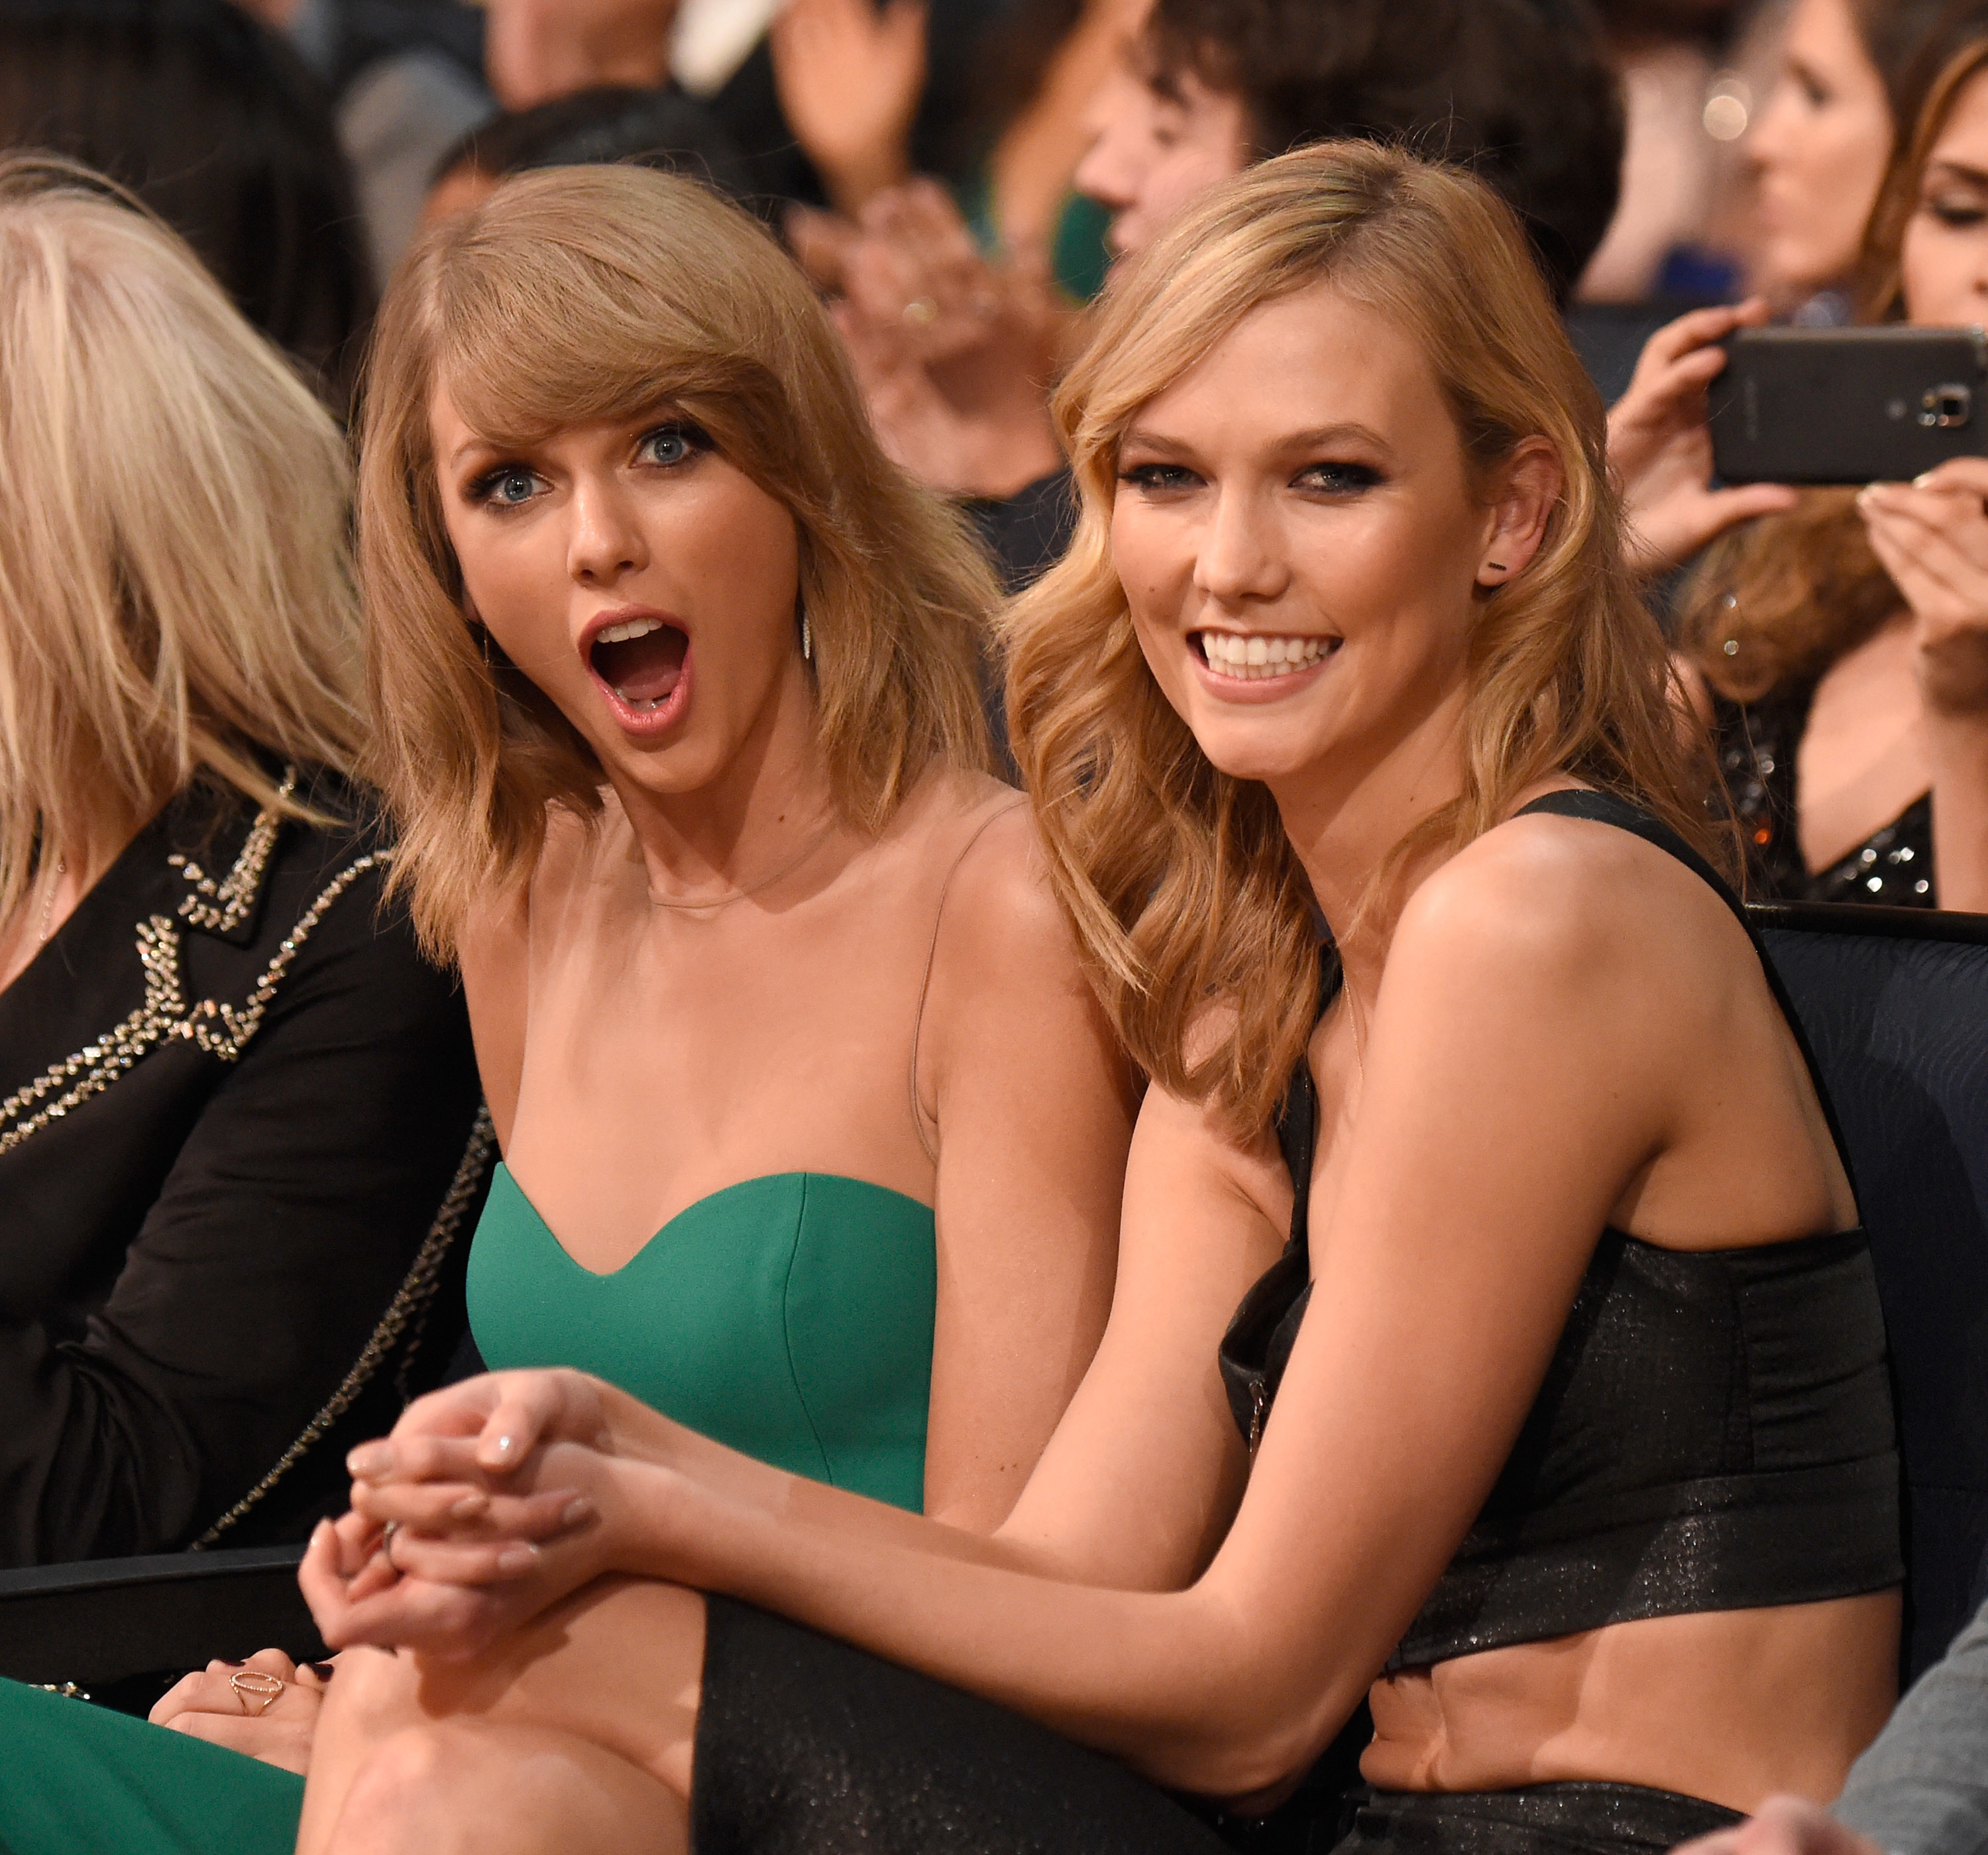 Taylor Swift and Karlie Kloss sitting together, Taylor with a surprised look, Karlie smiling, both in evening attire